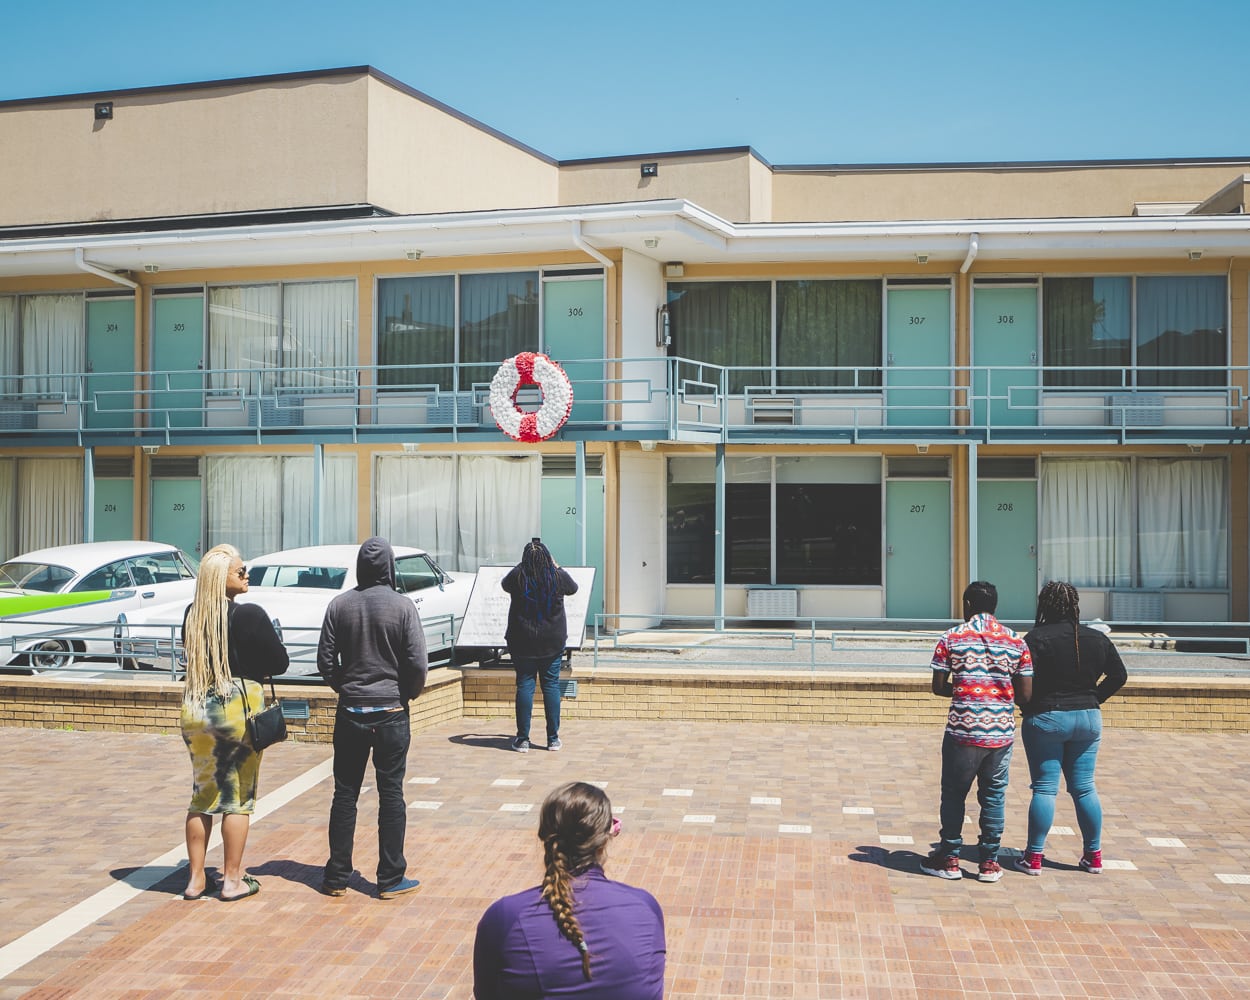 The Lorraine Motel, Honoring The Memory Of Martin Luther King Jr.